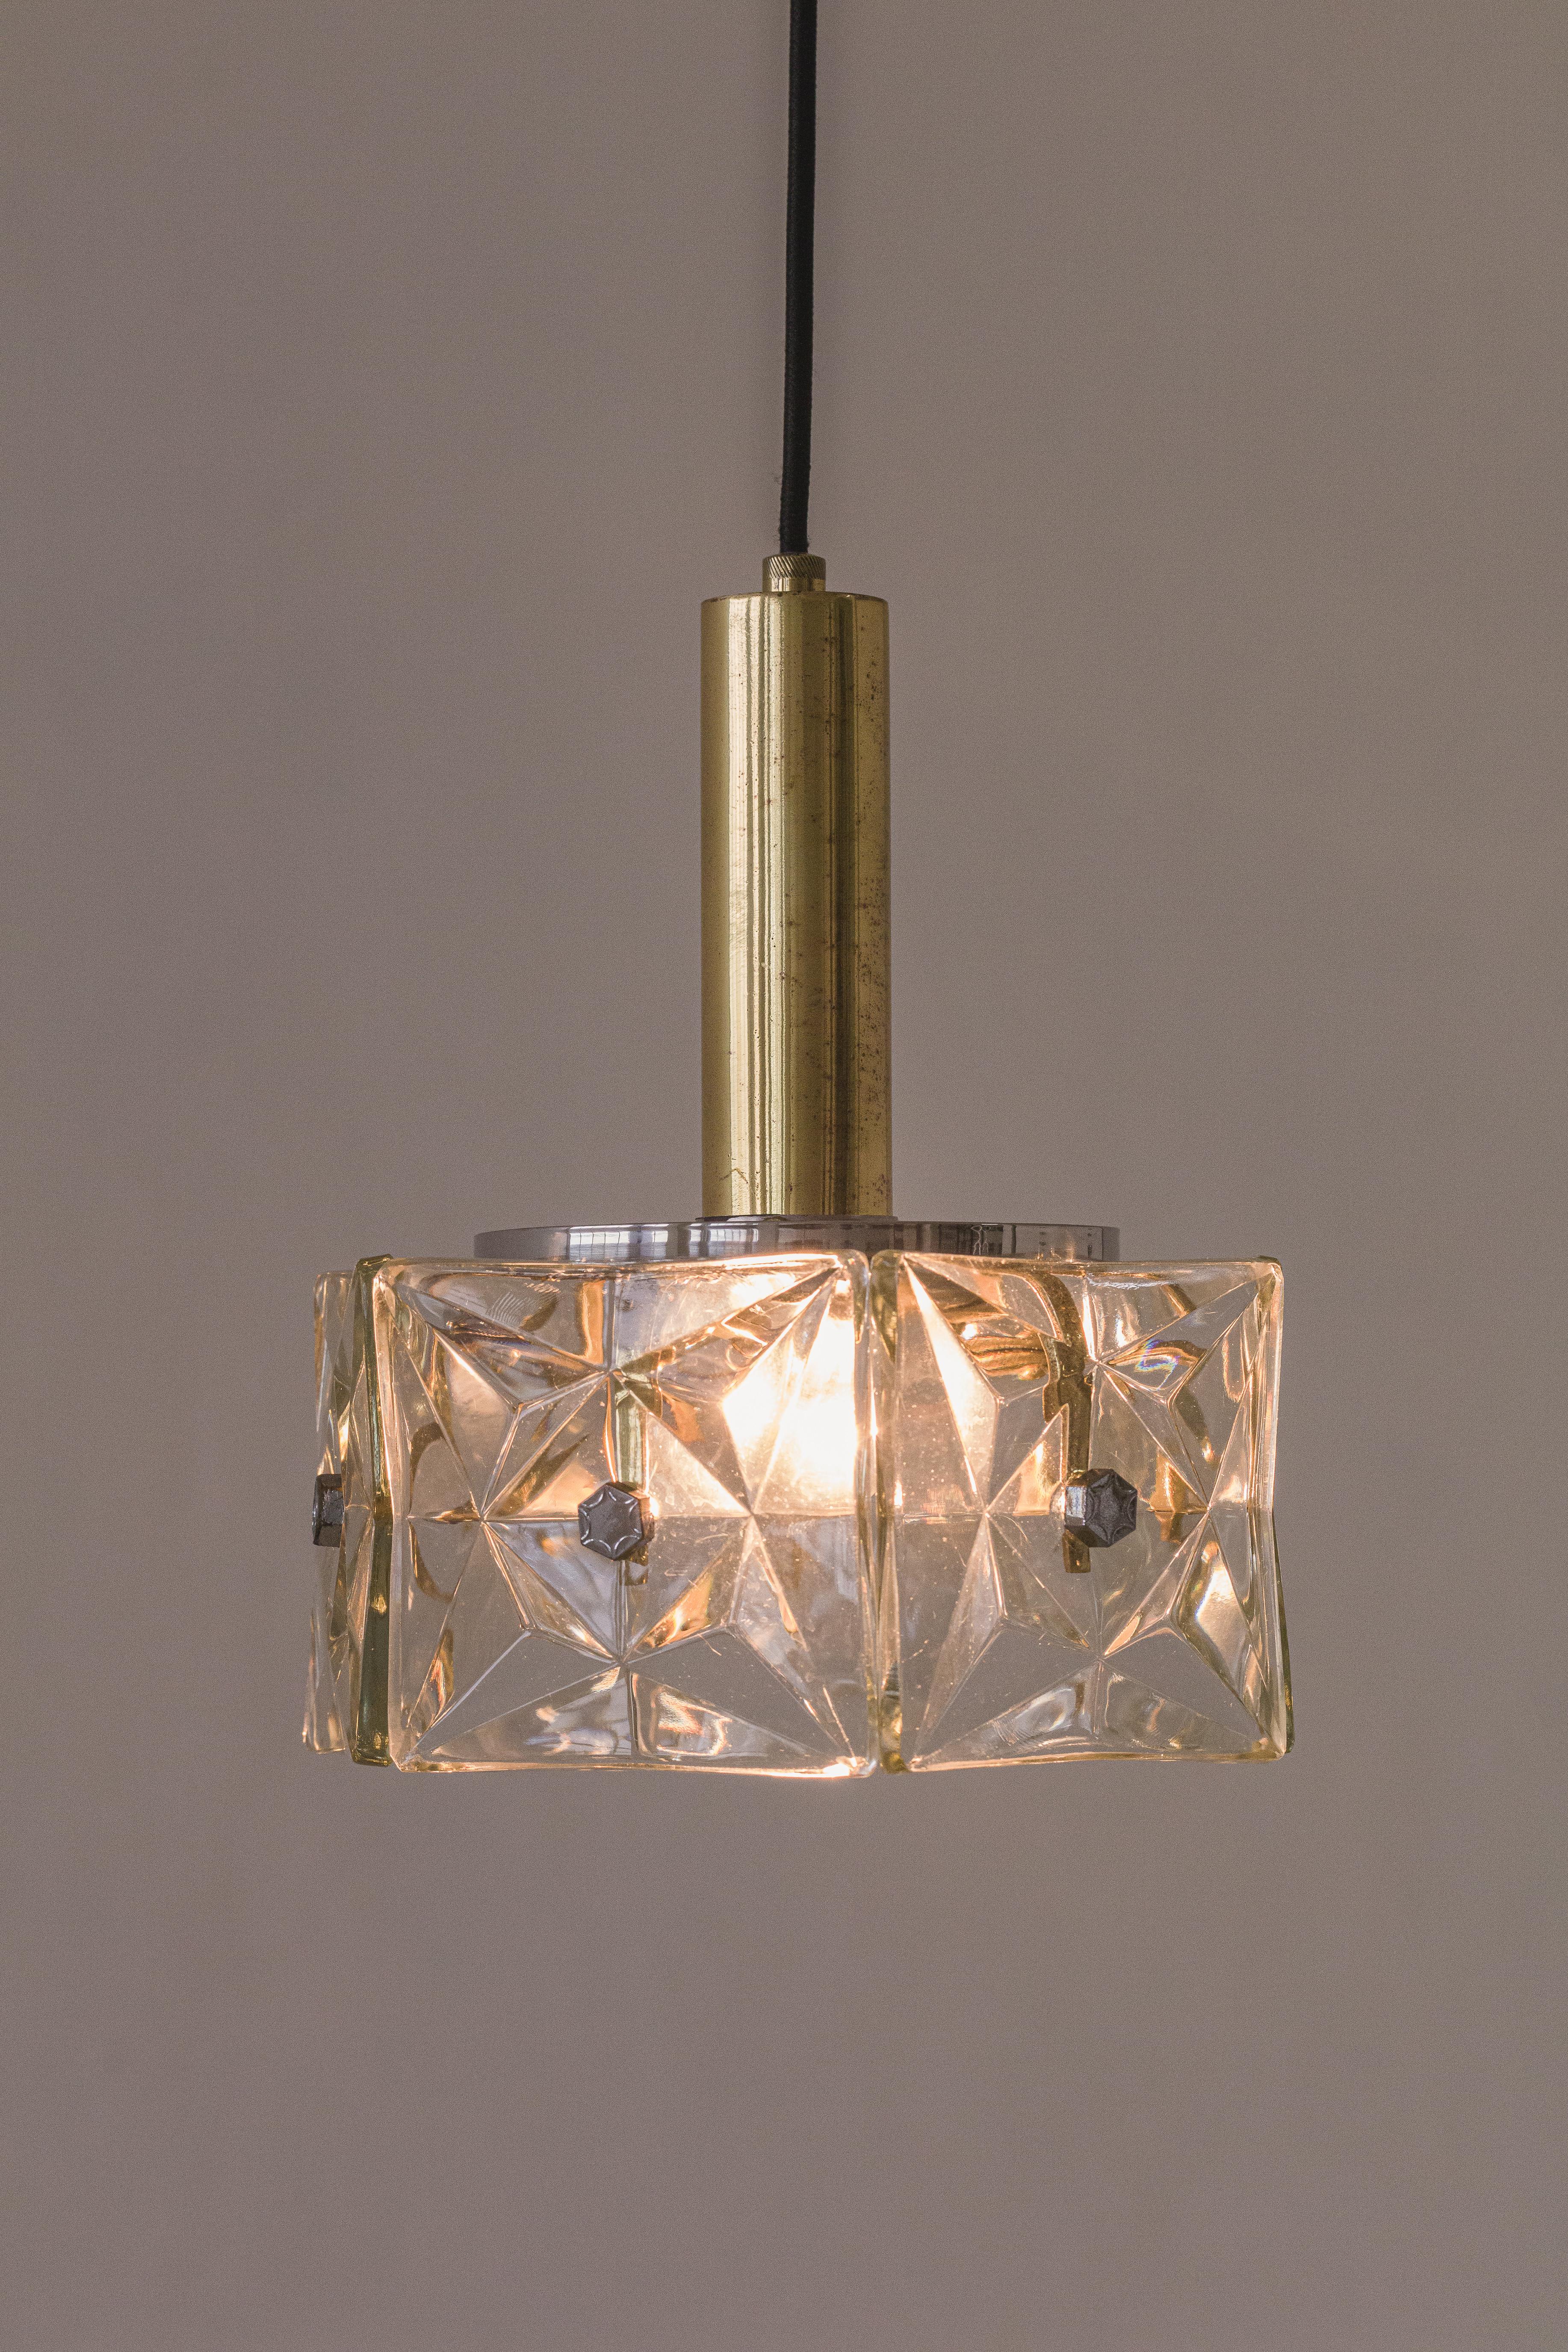 Vintage Pendant Lamp by Lustres Pelotas, Brass and Prismatic Glass, Brazil 1950s In Good Condition For Sale In New York, NY